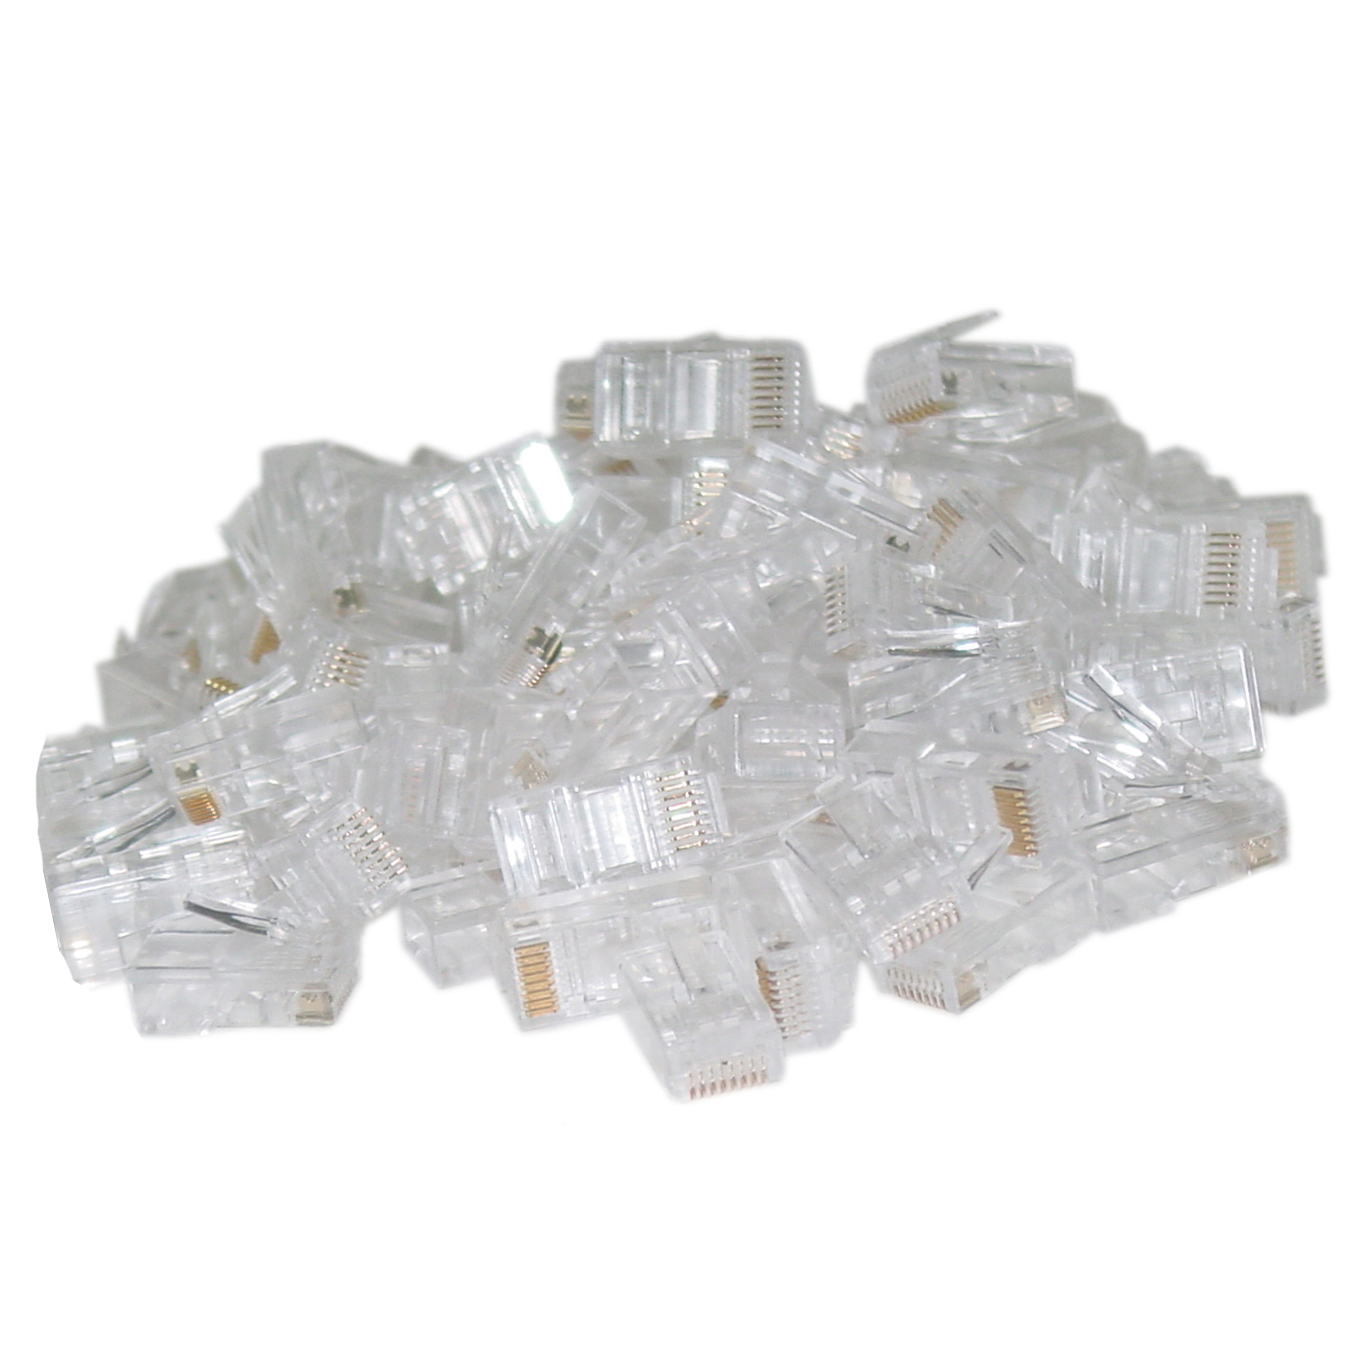 108705 - CAT5e RJ45 Crimp-On Connector Plugs for Stranded Cable - Bag of 100